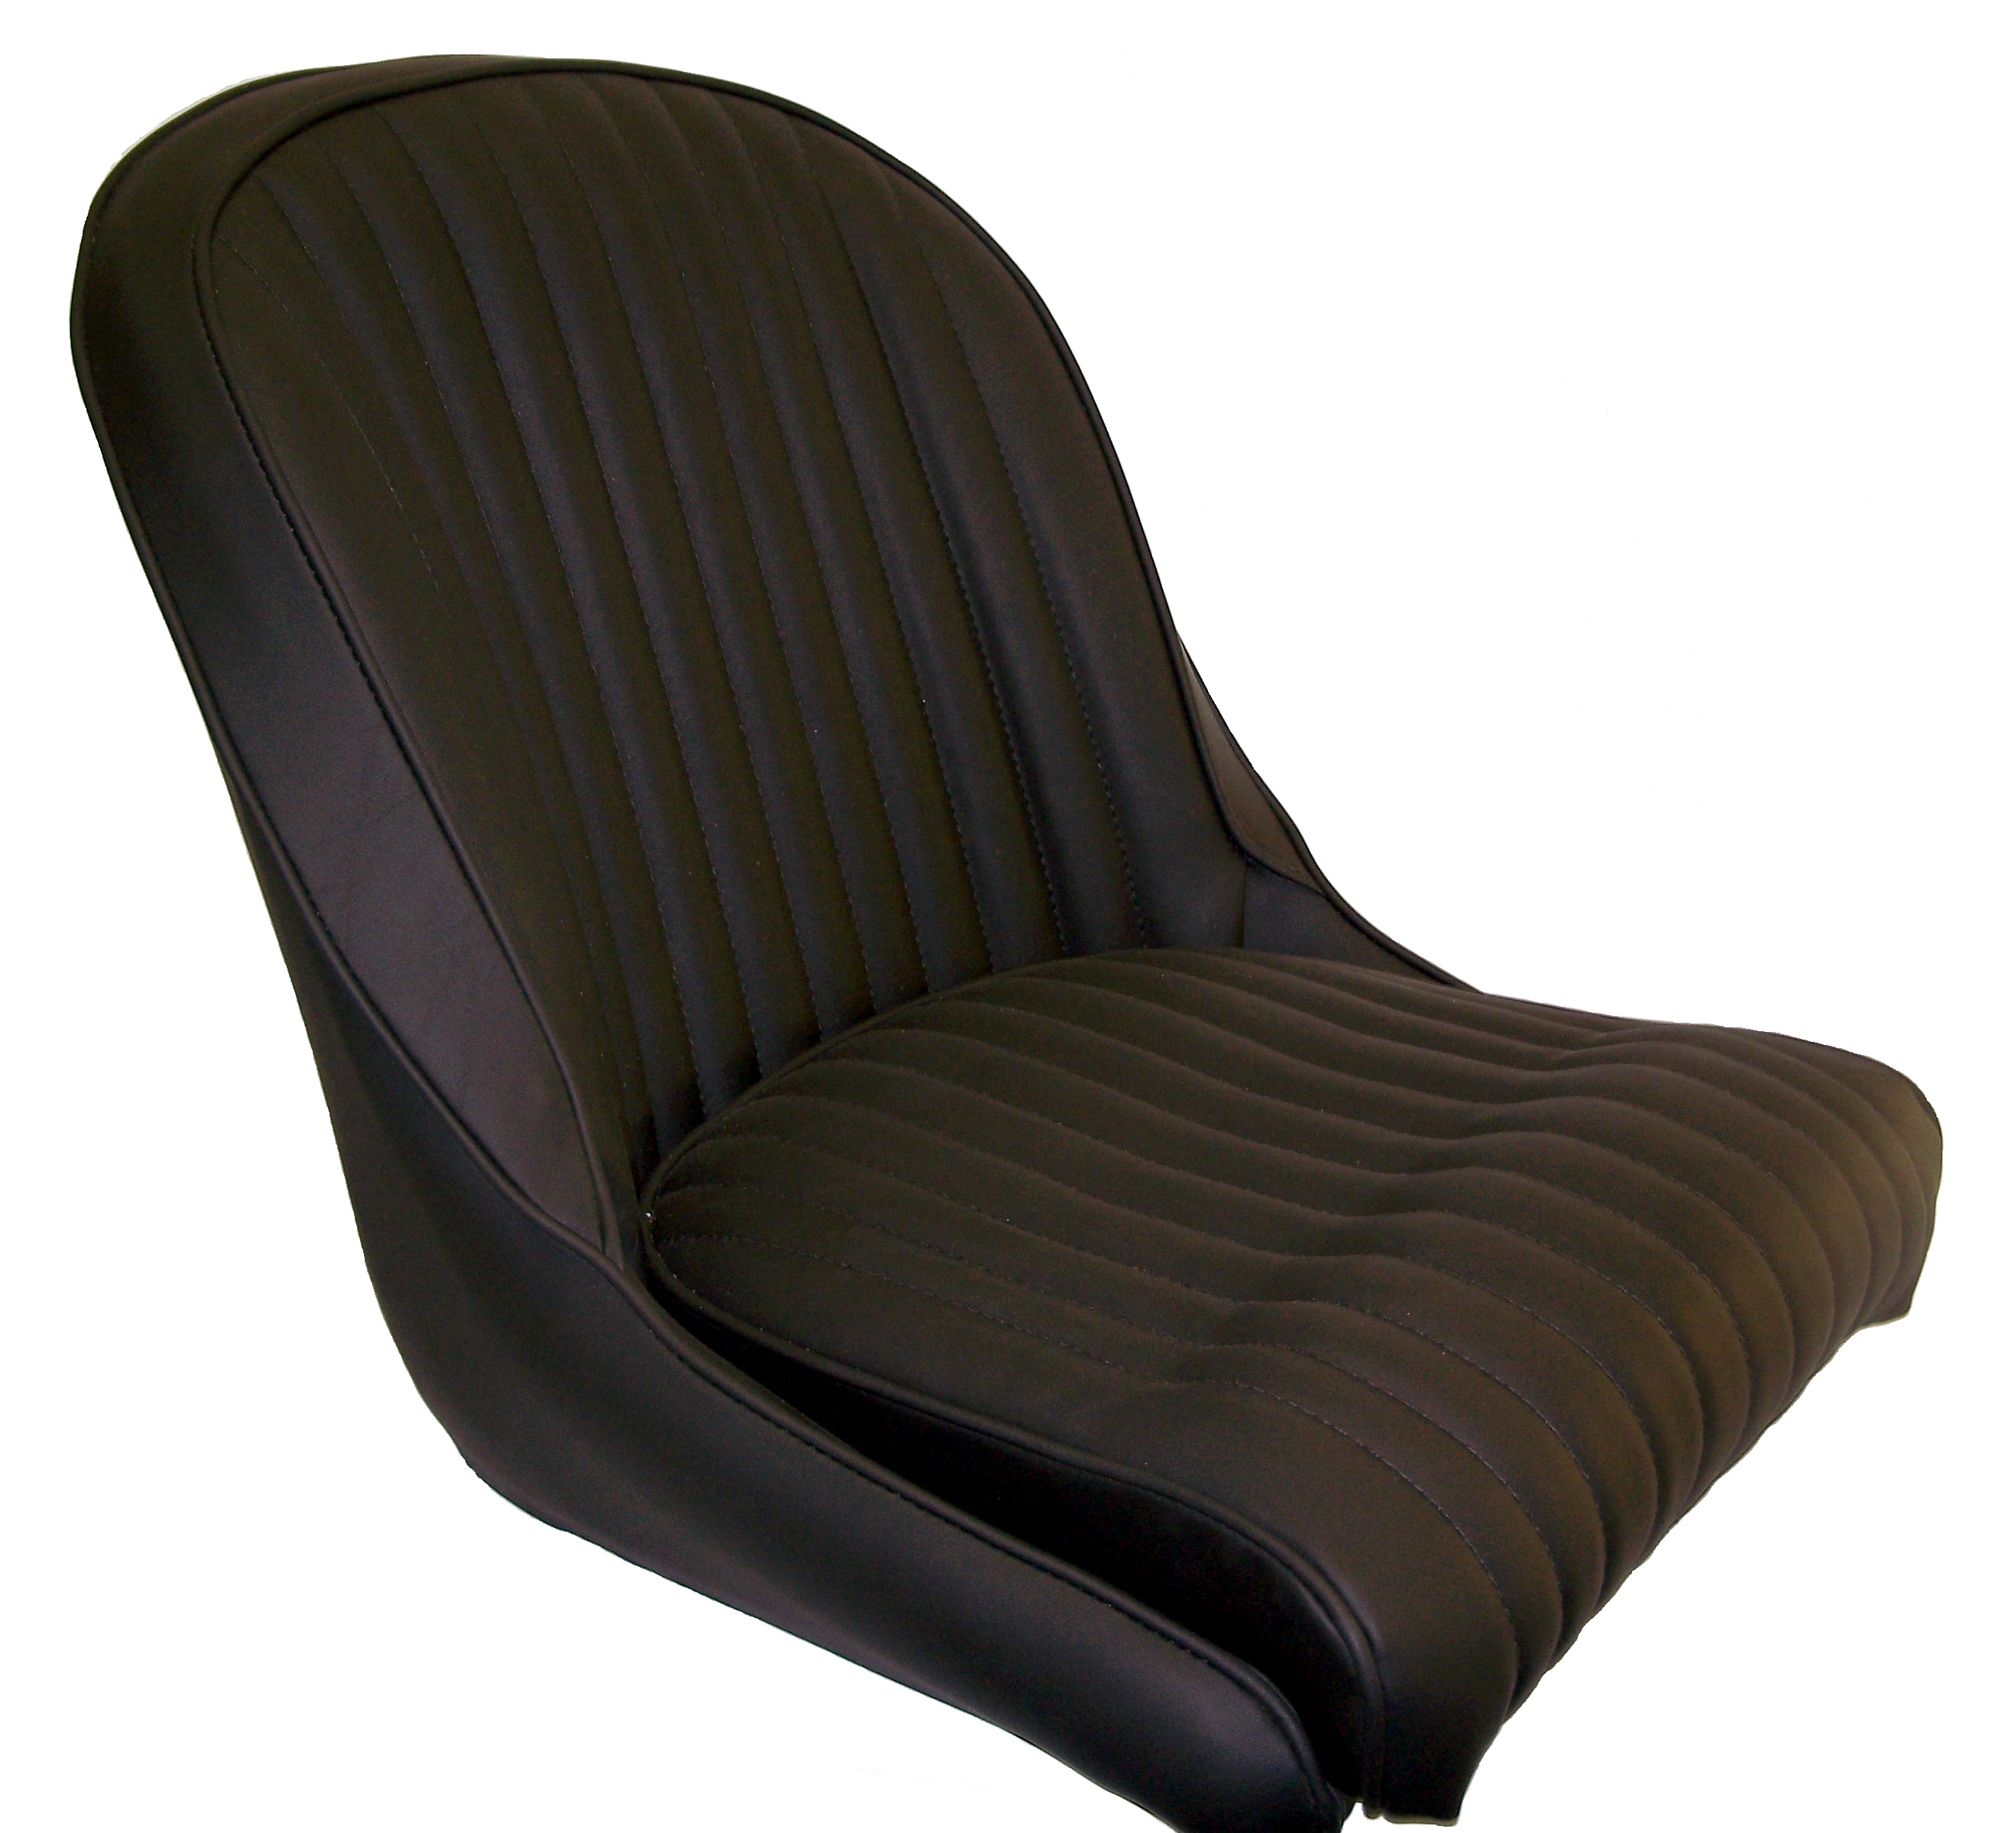 seat upholstered leather each